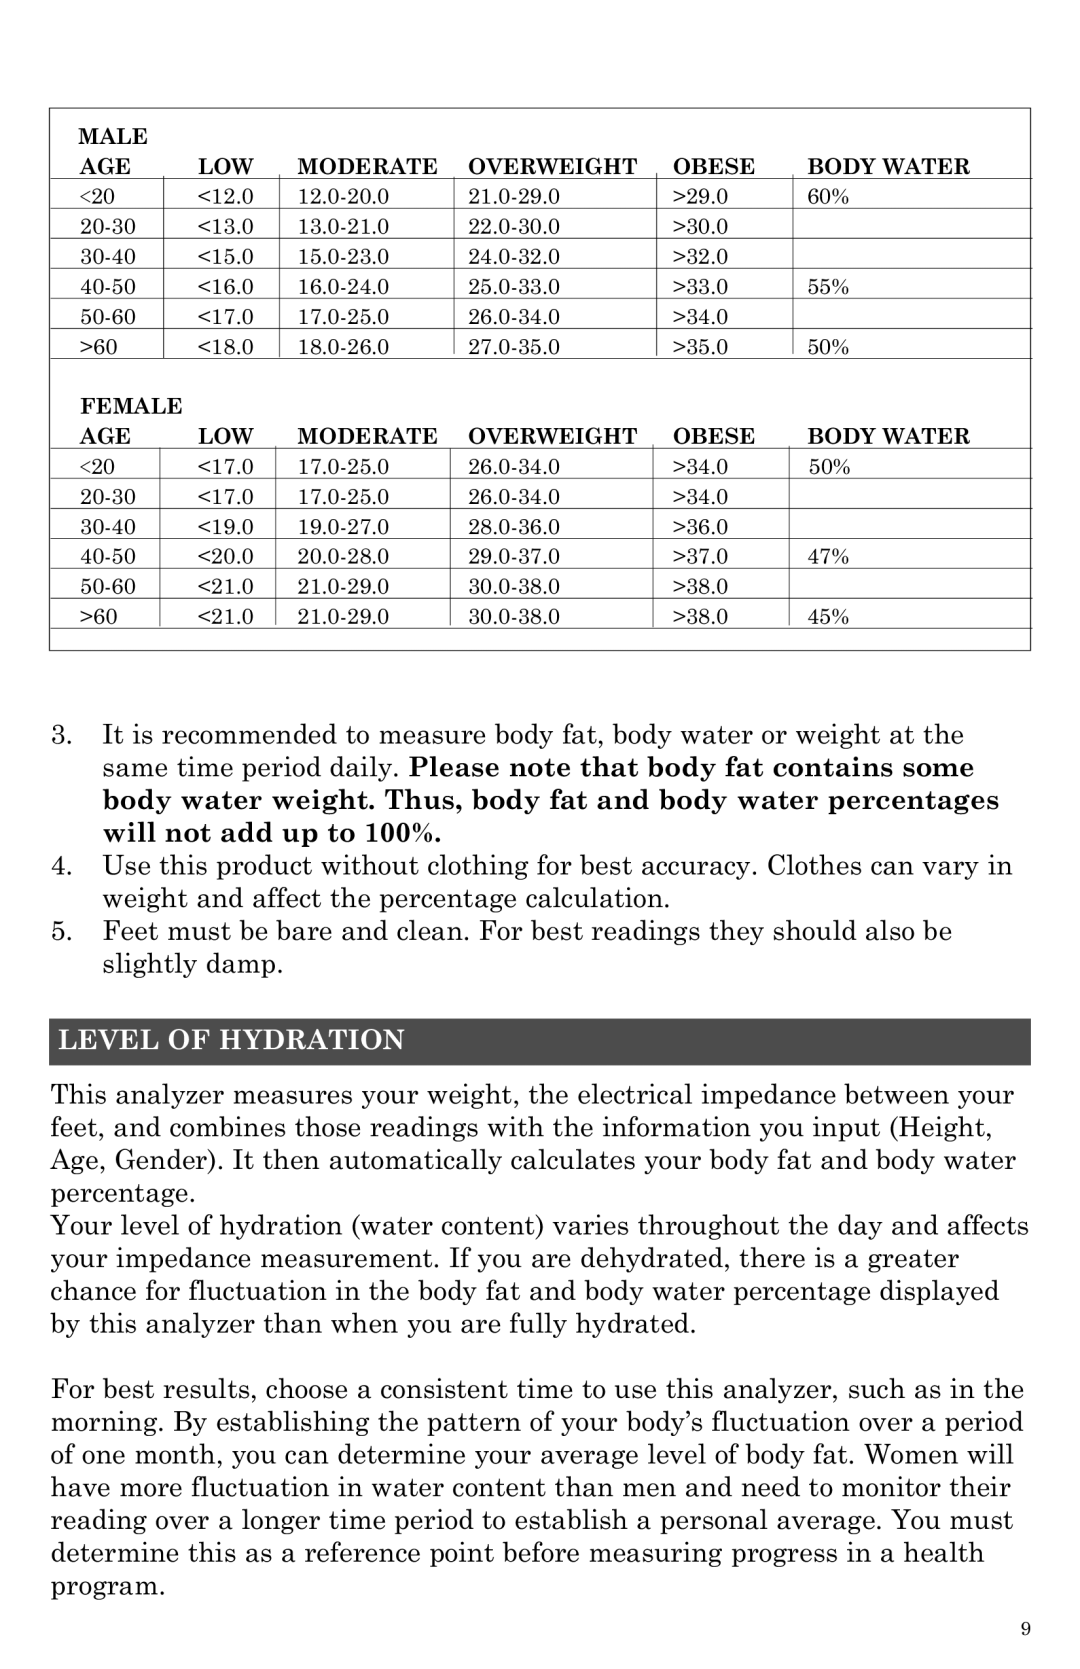 Taylor 5754 instruction manual Level of Hydration, Male AGE LOW Moderate Overweight Obese Body Water 